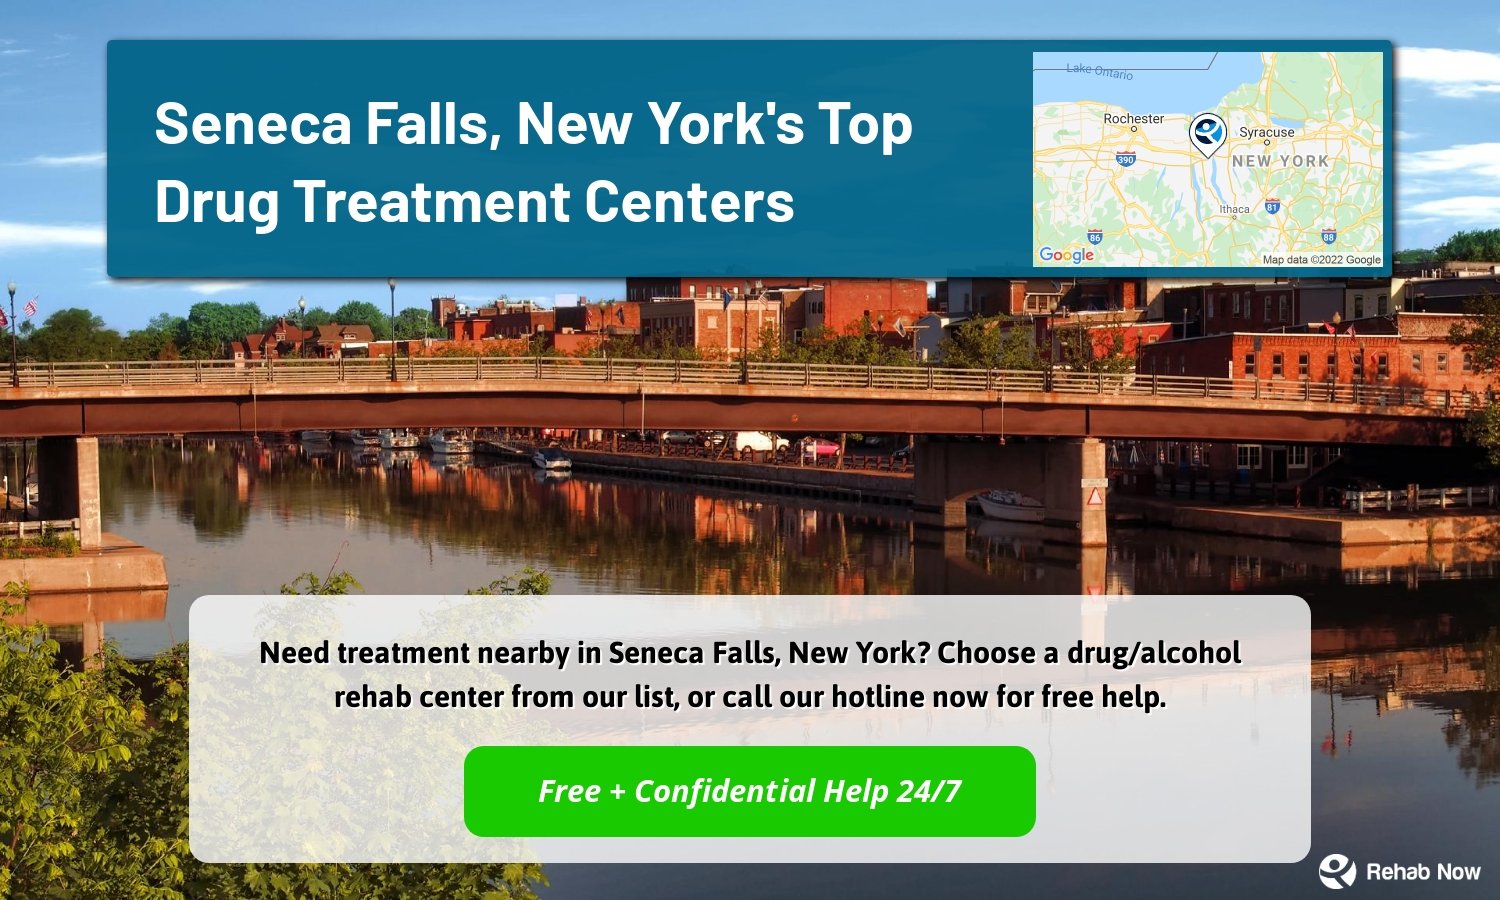 Need treatment nearby in Seneca Falls, New York? Choose a drug/alcohol rehab center from our list, or call our hotline now for free help.